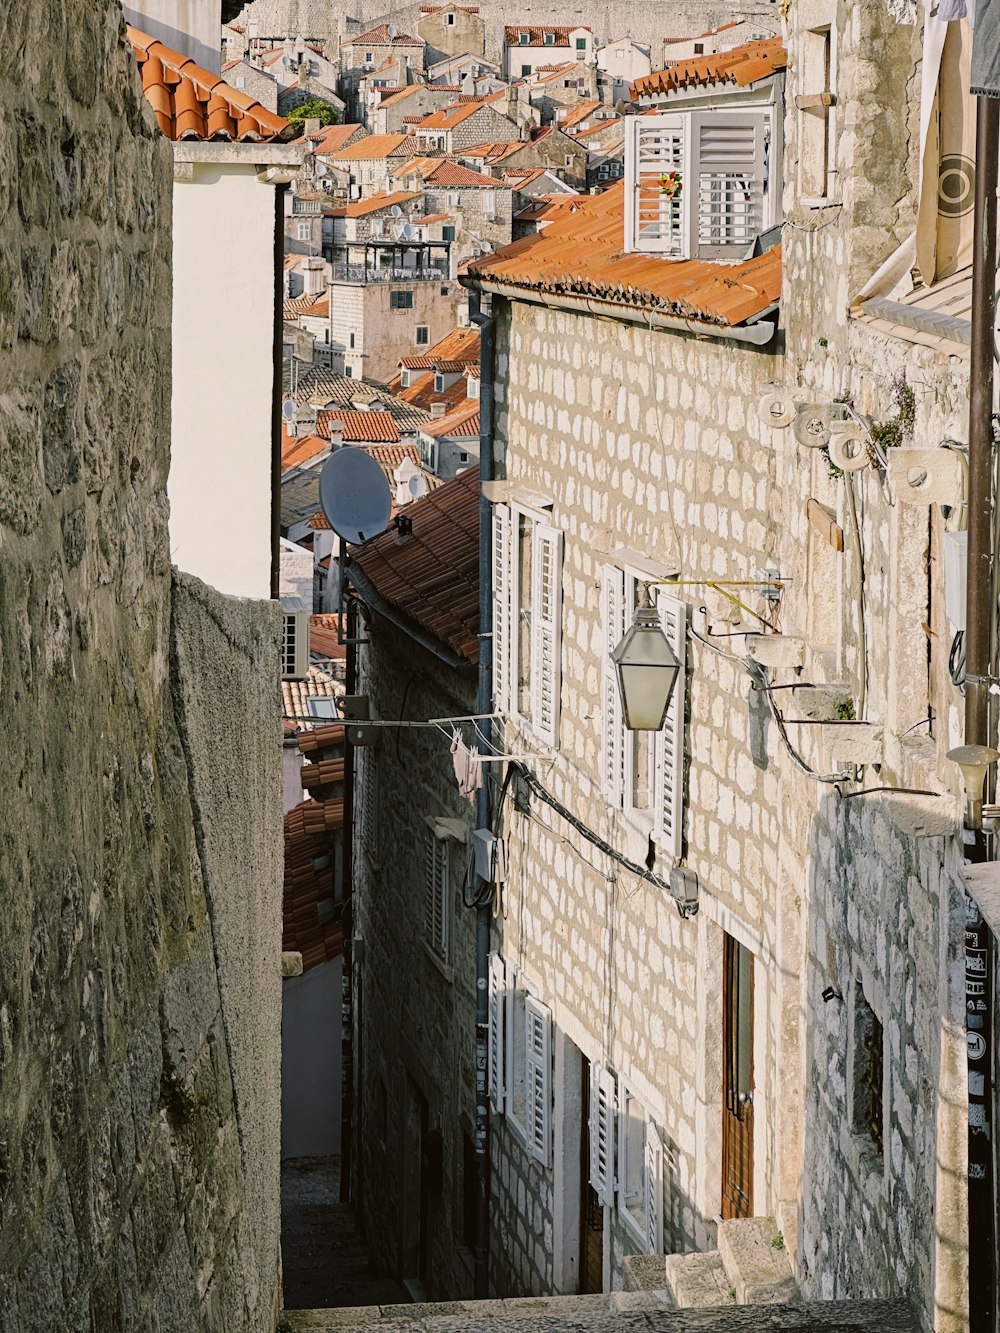 a narrow alley way with buildings in the background